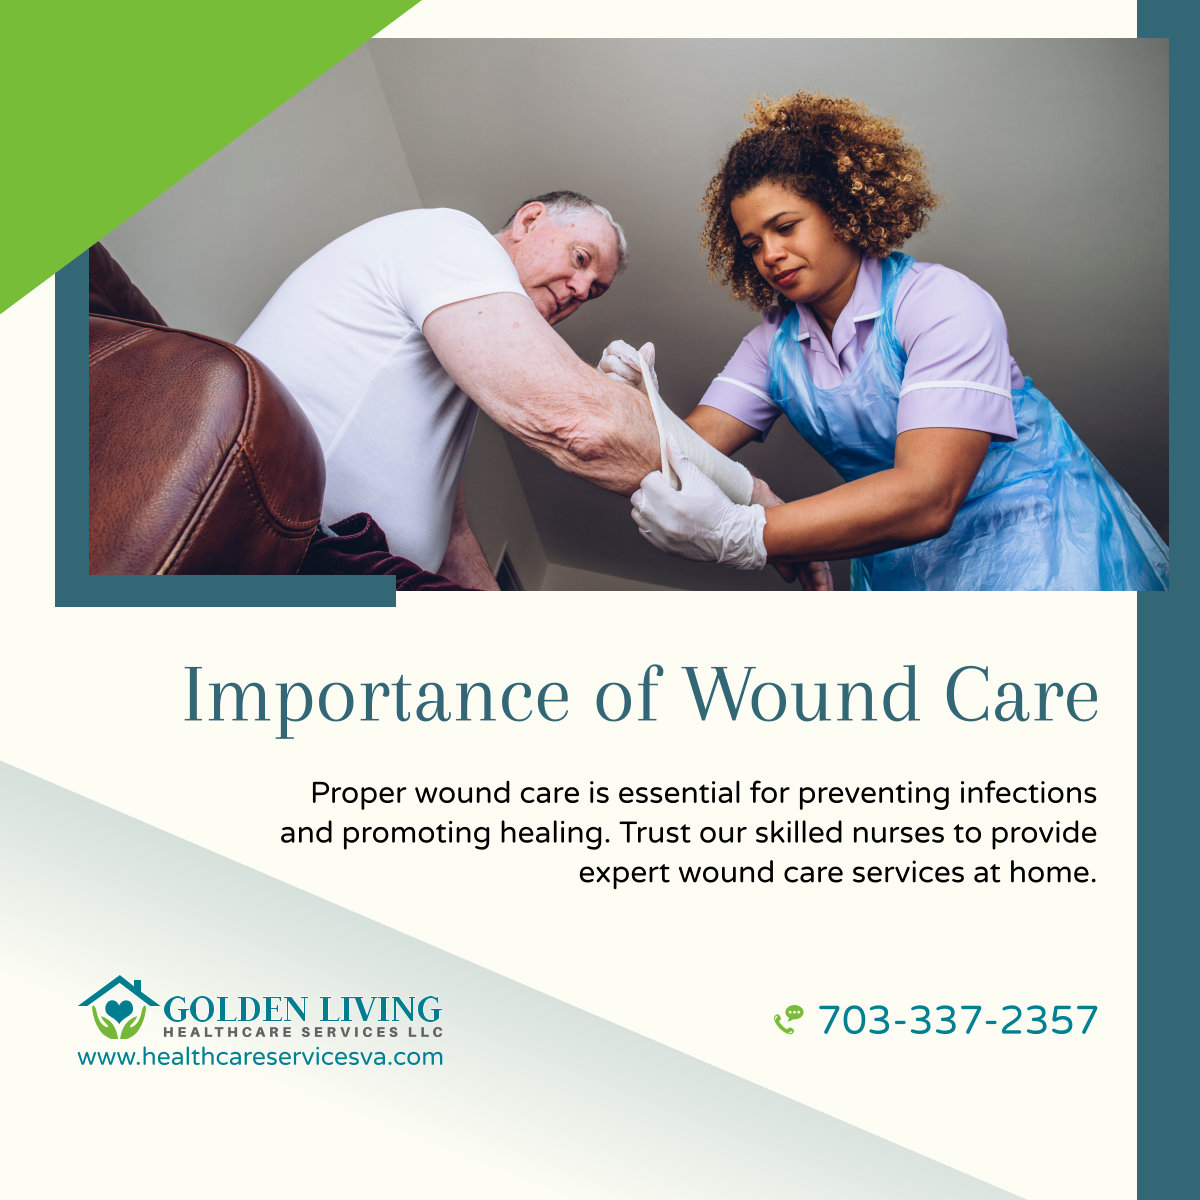 Ensure proper healing and prevent complications with our specialized wound care services. Contact us at 703-337-2357 for professional wound care.

#LortonVA #HomeHealthcare #WoundCare